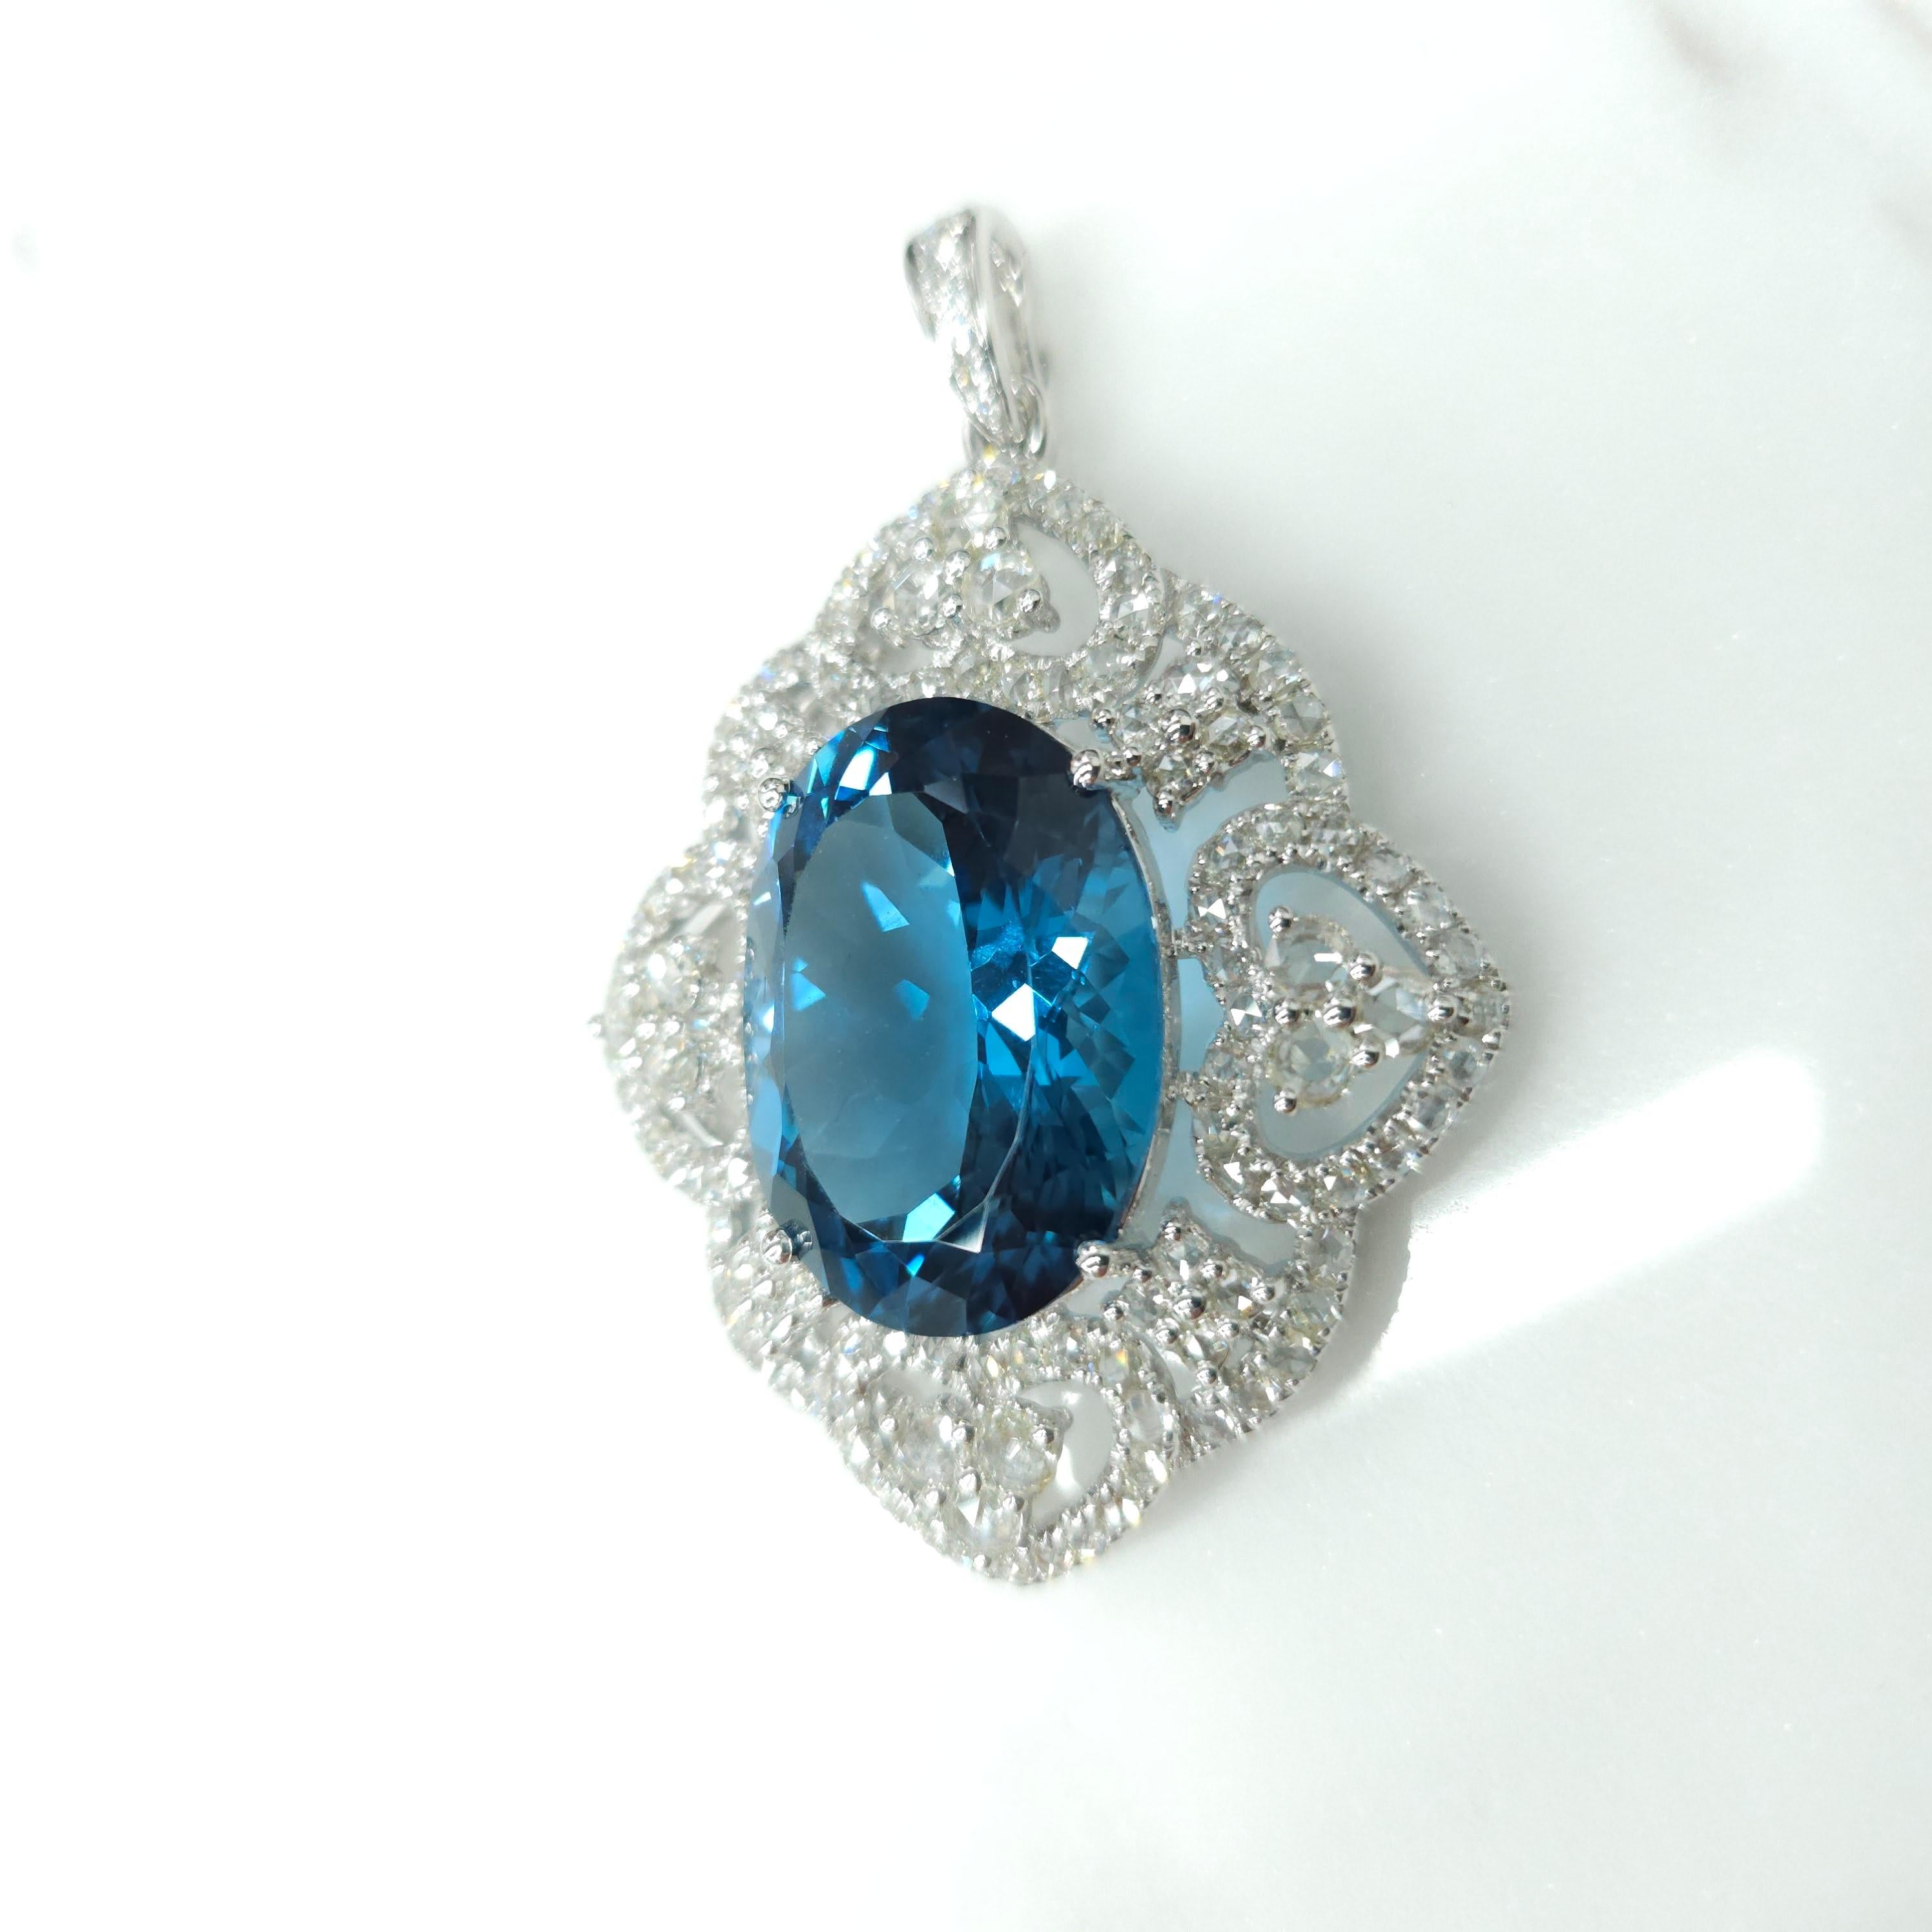 Elevate your jewelry collection with this exquisite Georgian style pendant featuring a luxurious IGI Certified 24.10 Carat natural Topaz in an intense greenish-blue hue that is truly mesmerizing. The oval shape of the topaz adds a touch of elegance